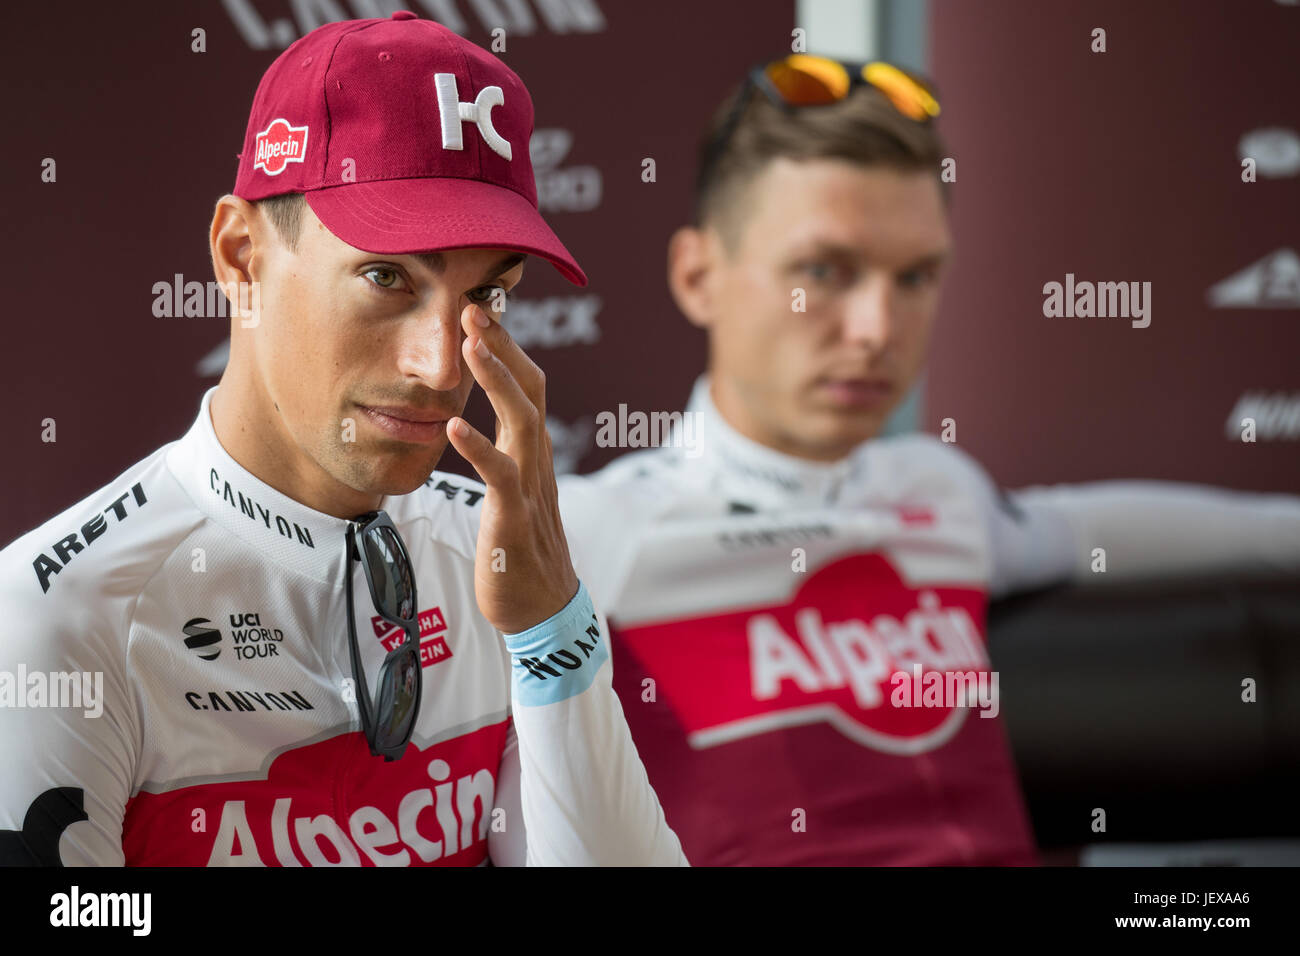 Duesseldorf, Germany. 28th June, 2017. Swiss cyclist Reto Hollenstein (L) and his German teammate Tony Martin (both Katusha Alpecin) at a press conference in Duesseldorf, Germany, 28 June 2017. Duesseldorf is the starting point of this year's Tour de France cycling competition which begins on the 1 July. Photo: Daniel Karmann/dpa/Alamy Live News Stock Photo